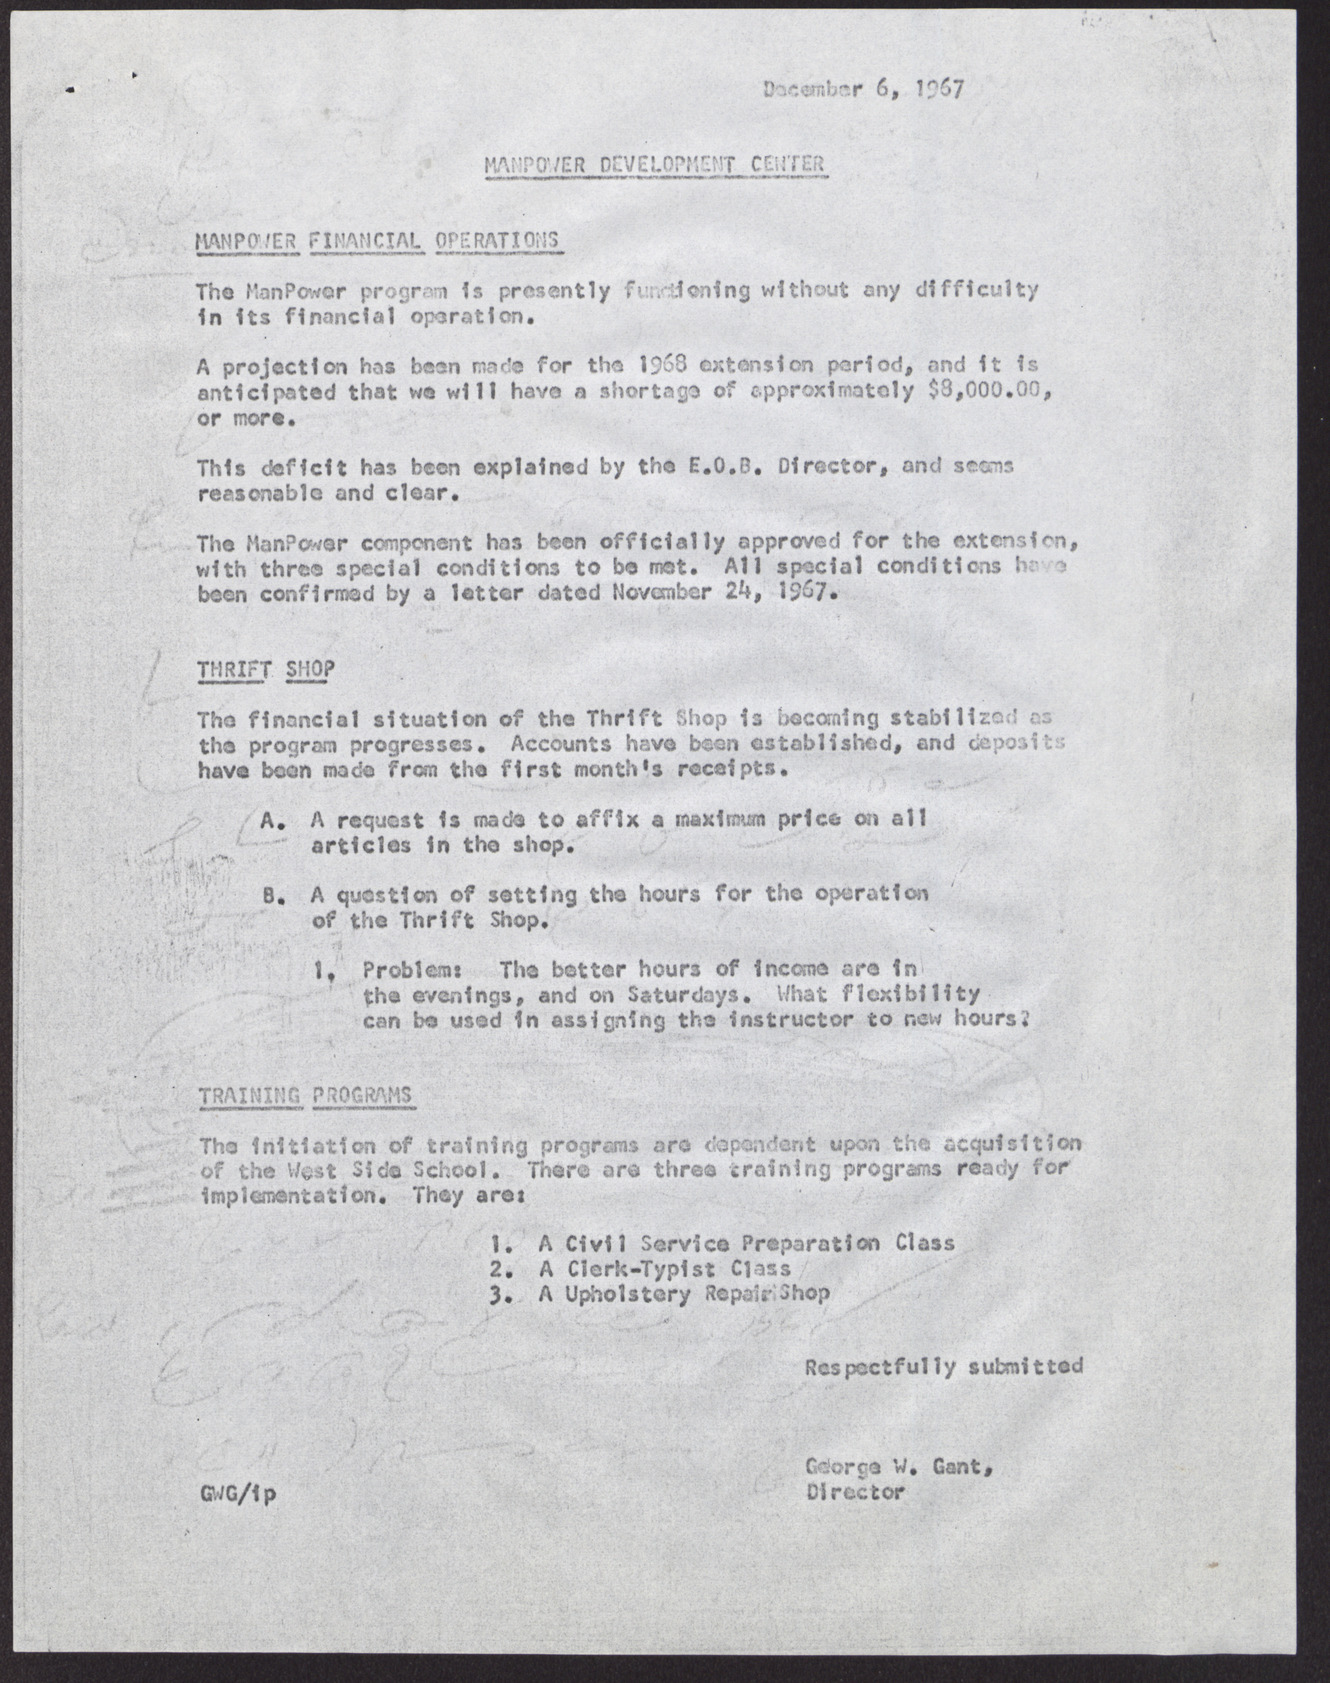 Minutes from Operation Independence Joint Meeting of Finance and Executive Committee (4 pages), December 6, 1968, page 4